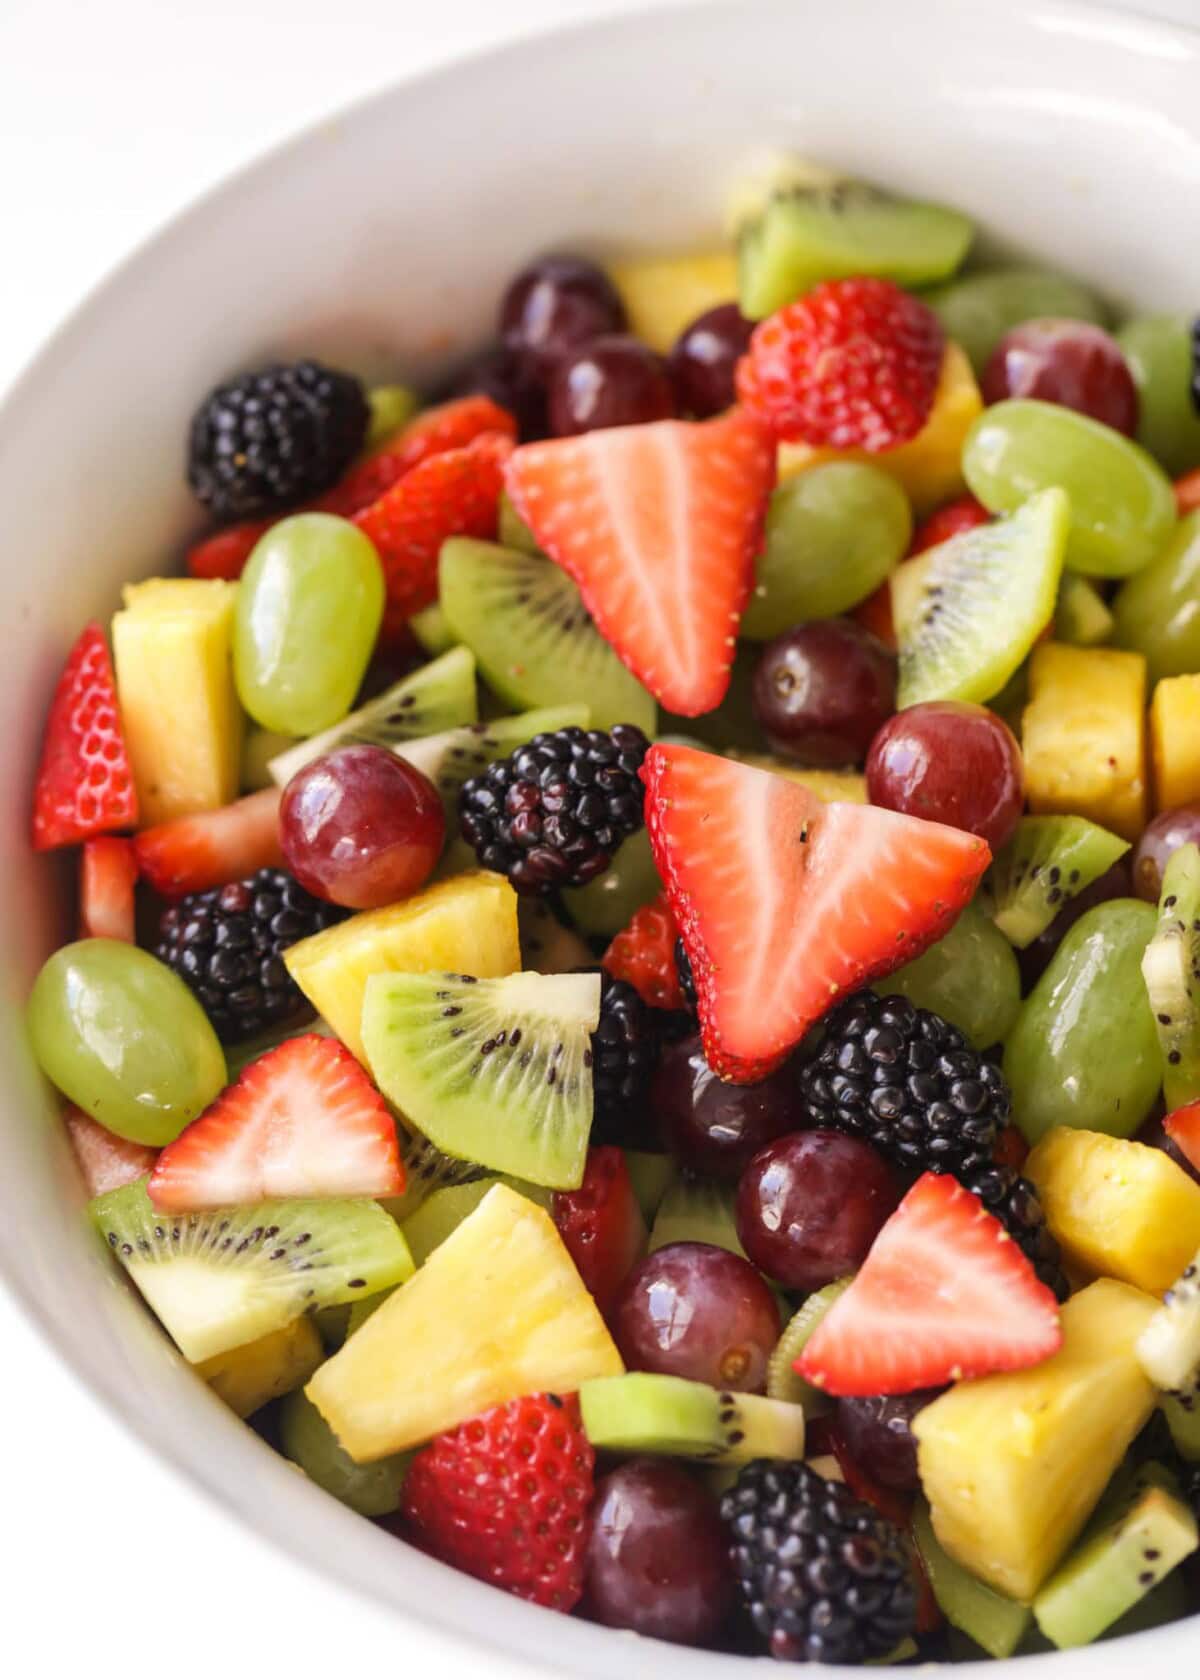 Fruit salad recipe served in a white bowl.